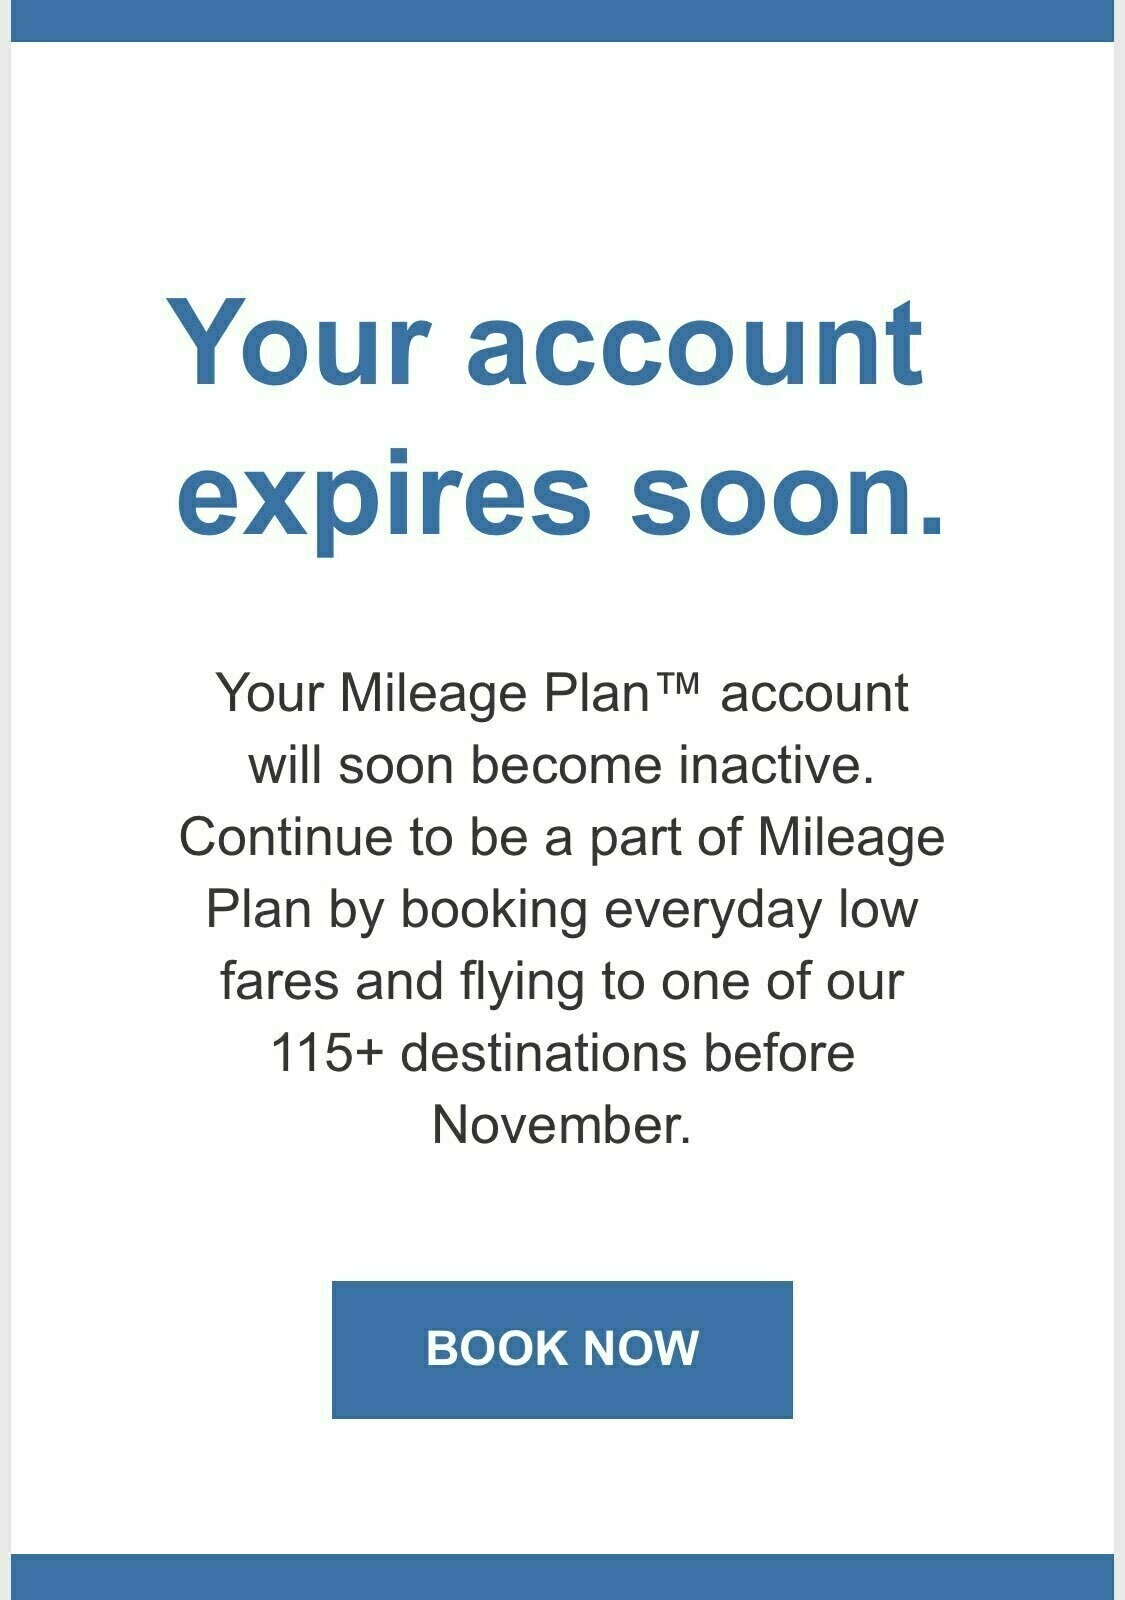 screenshot of email letting me know my airline frequent flyer account is going to close